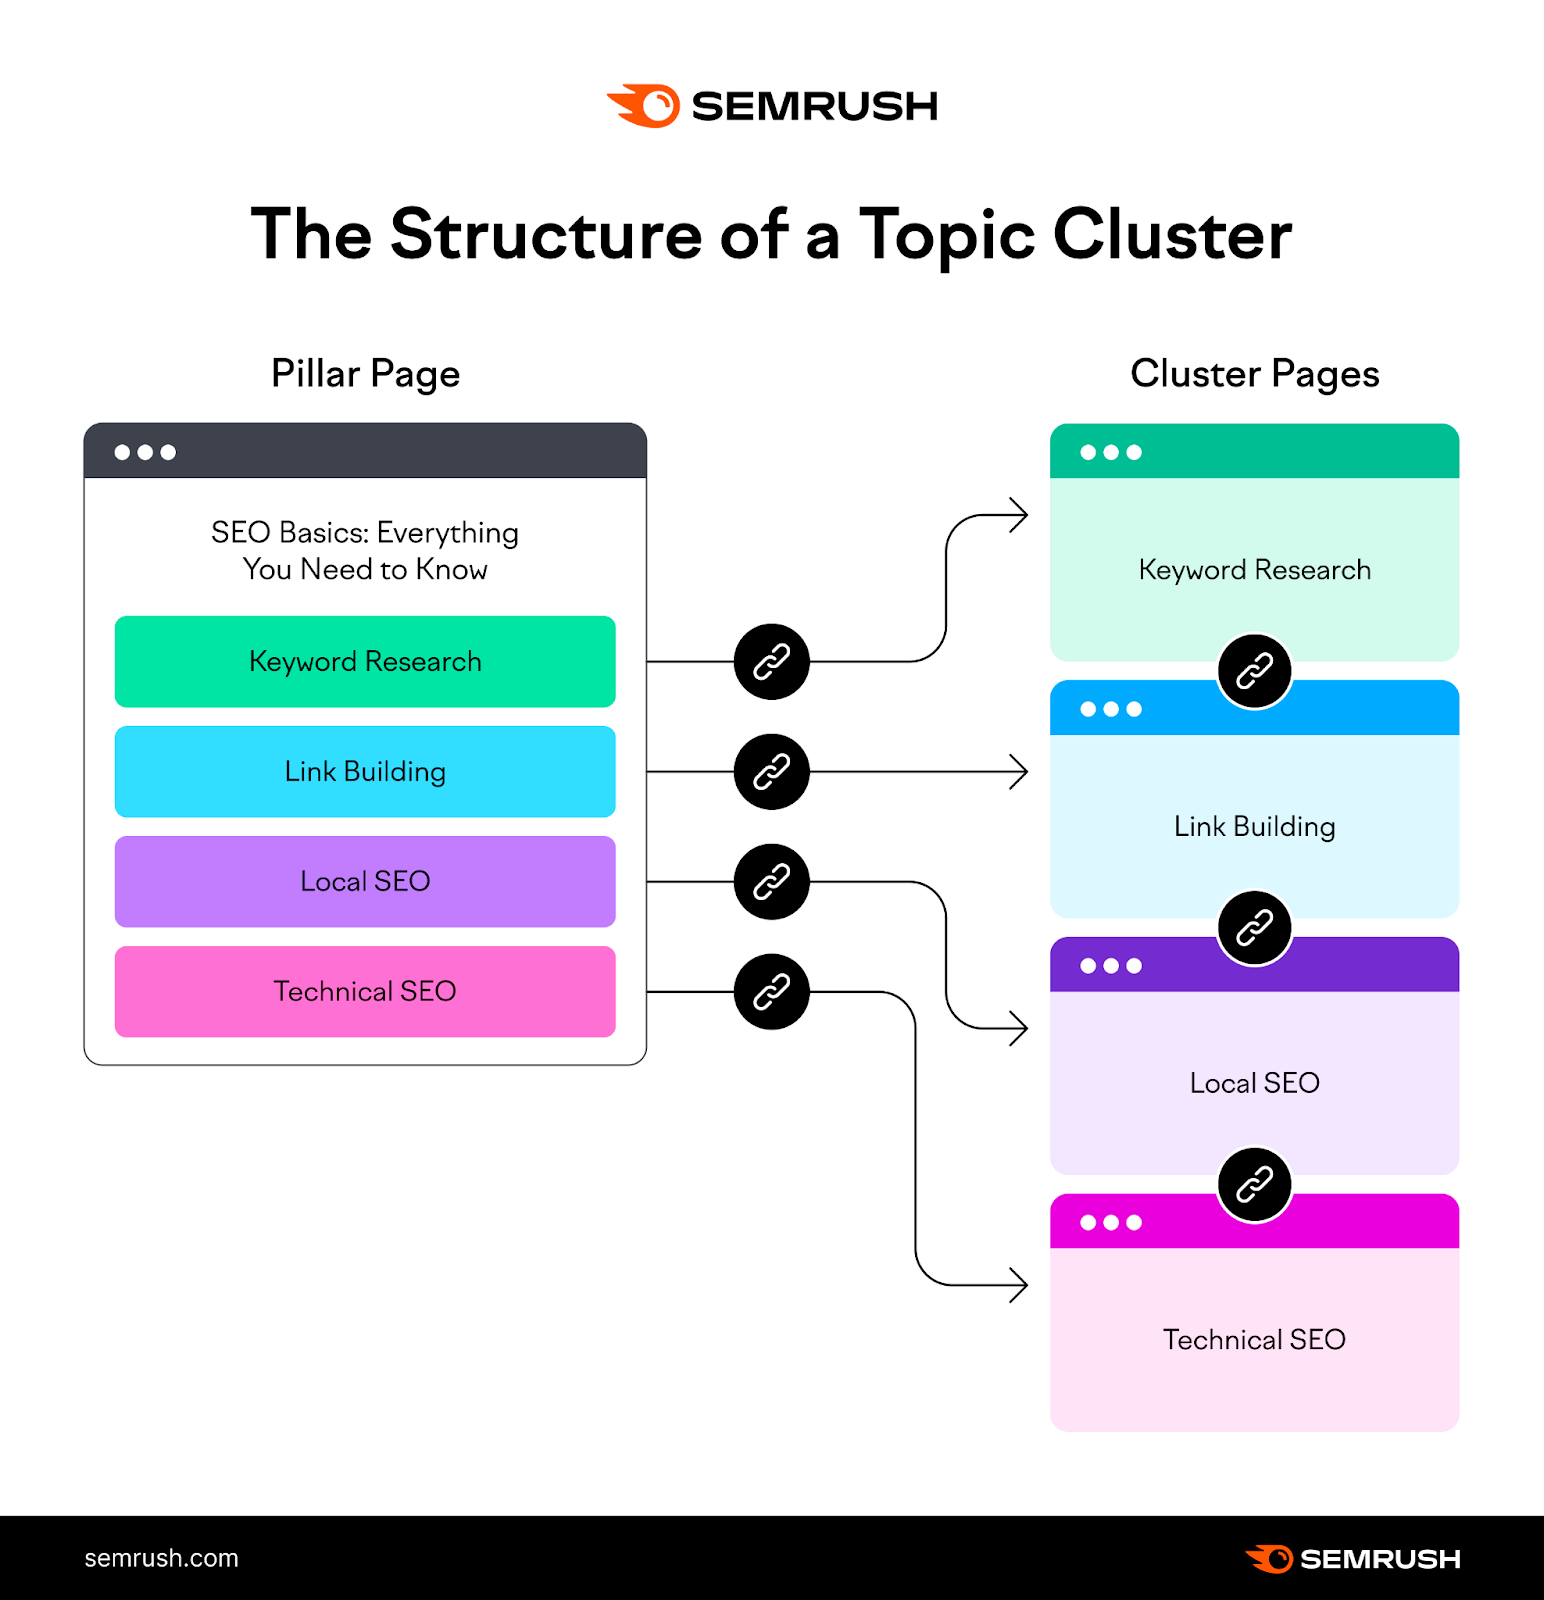 "The Structure of a Topic Cluster" infographic